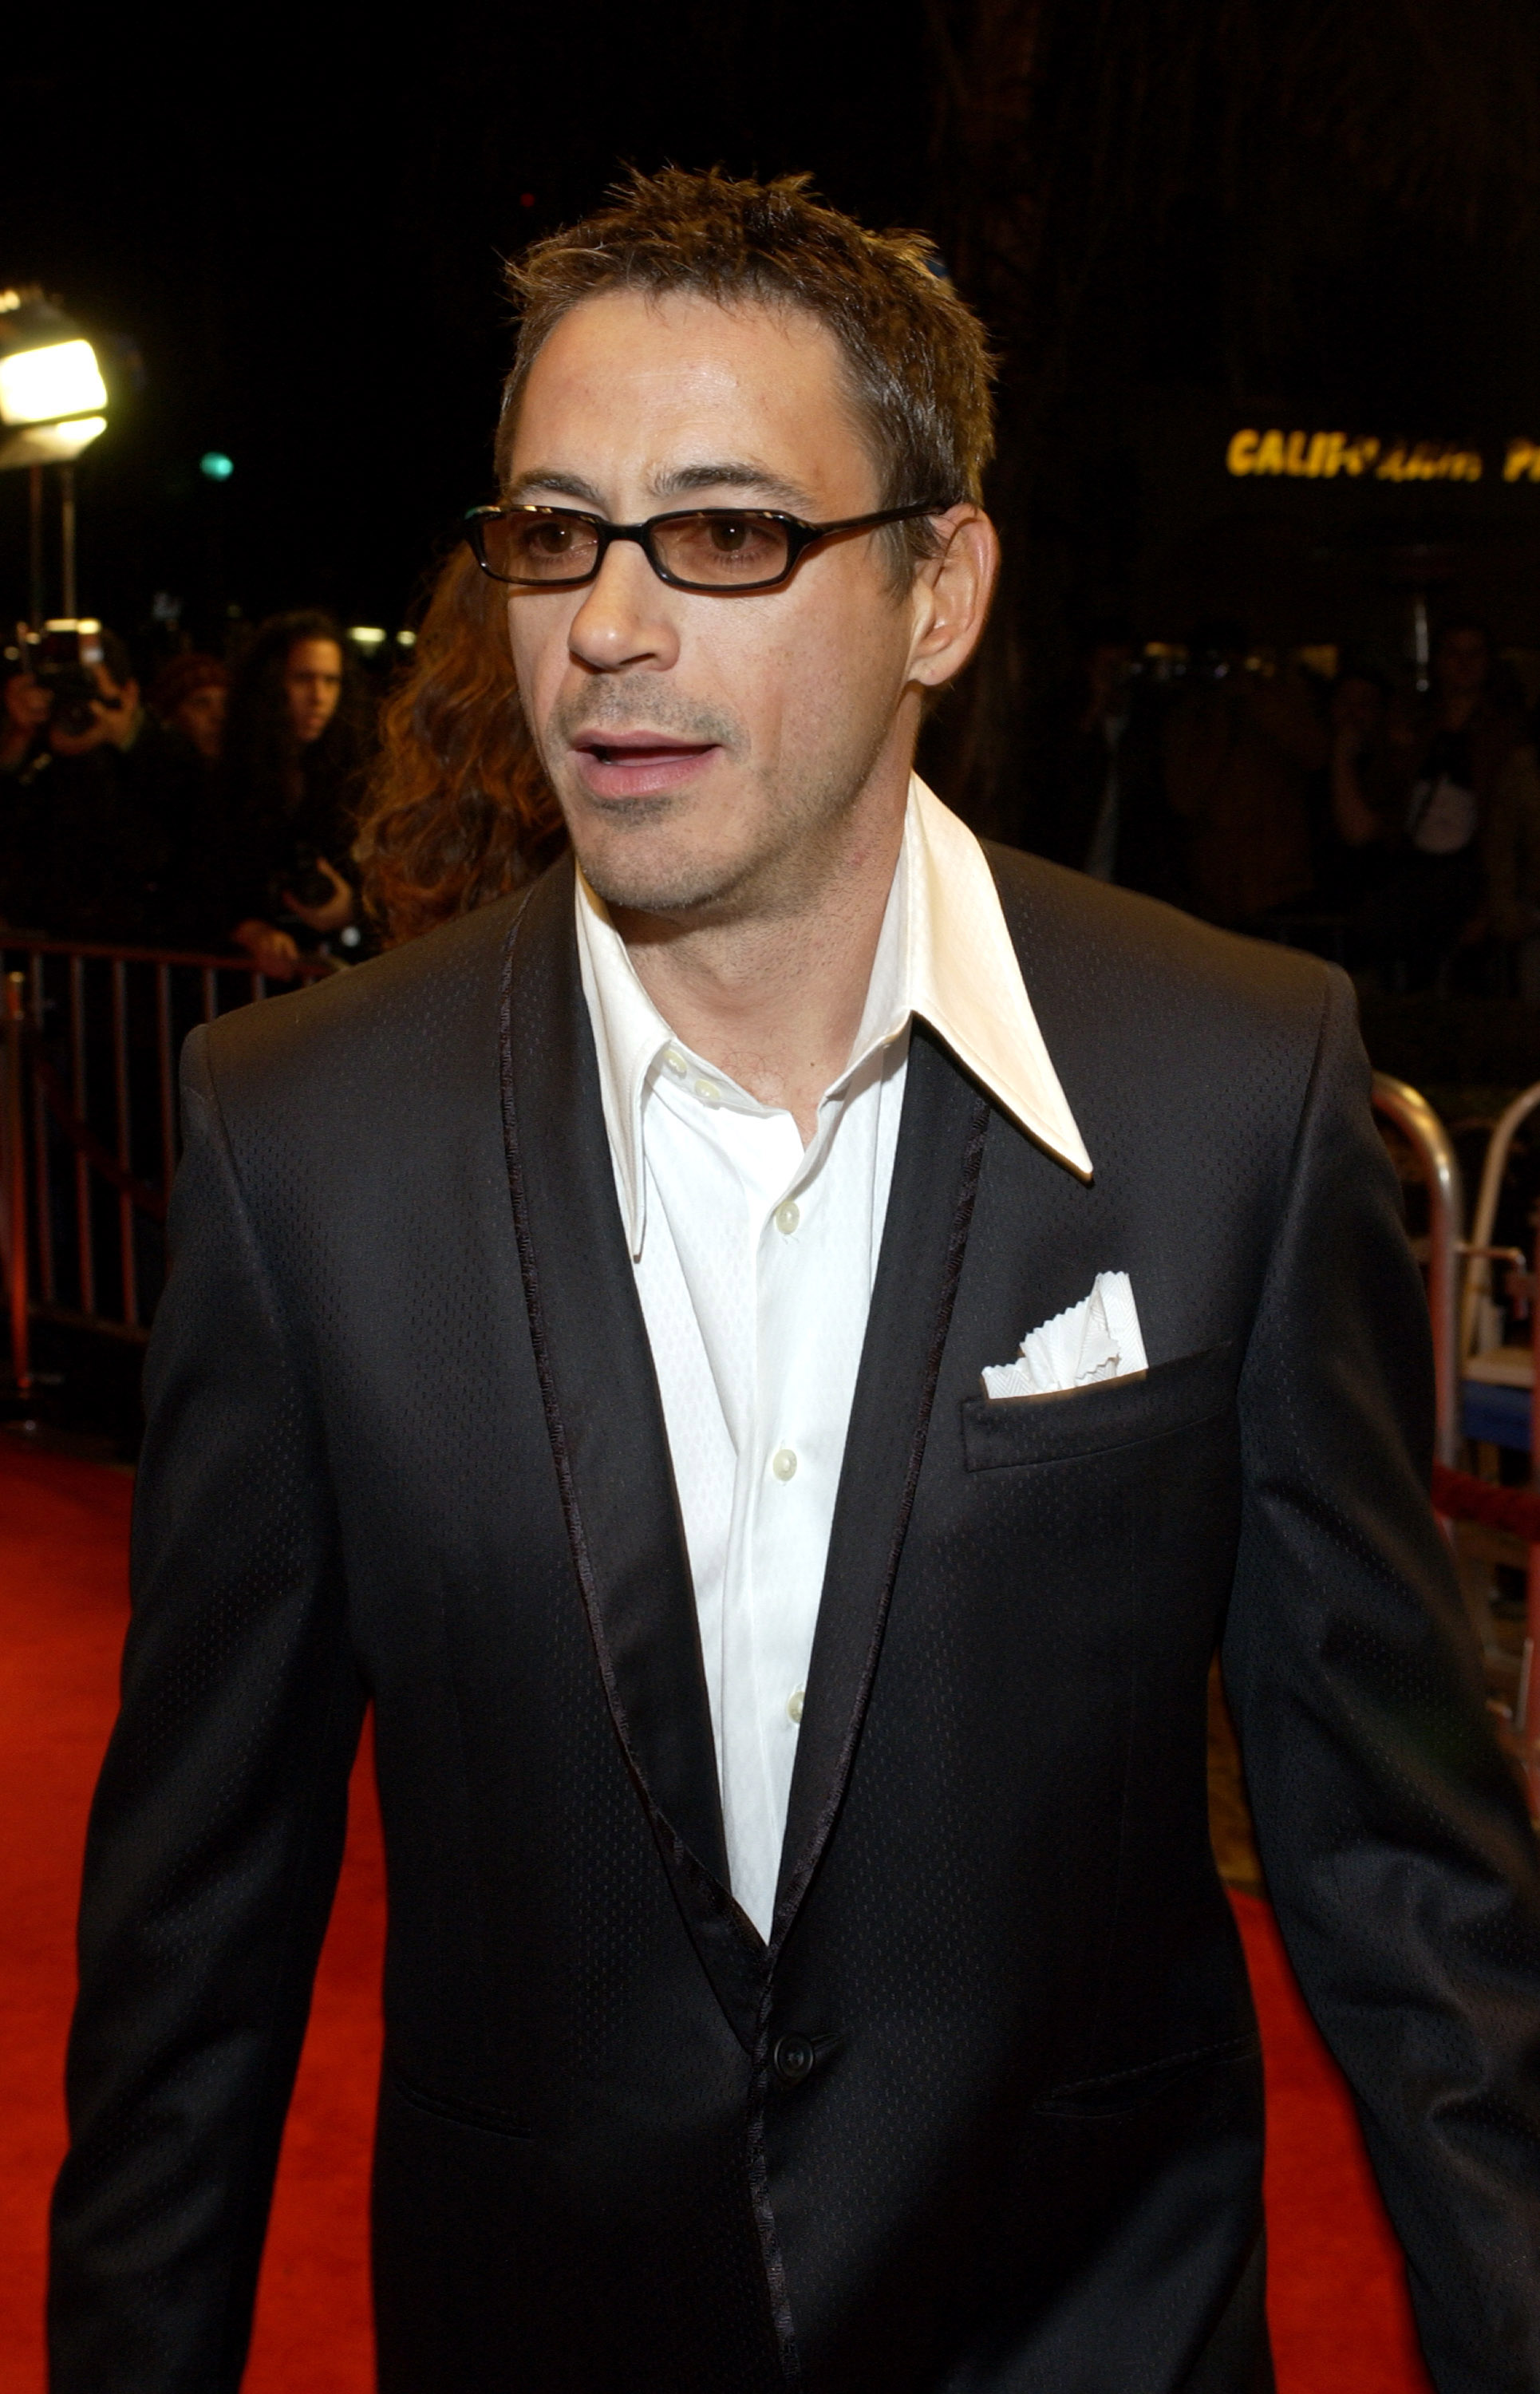 Robert Downey Jr. on the red carpet of the premiere of "Gothika" at Mann Village Theatre in Westwood, California | Source: Getty Images